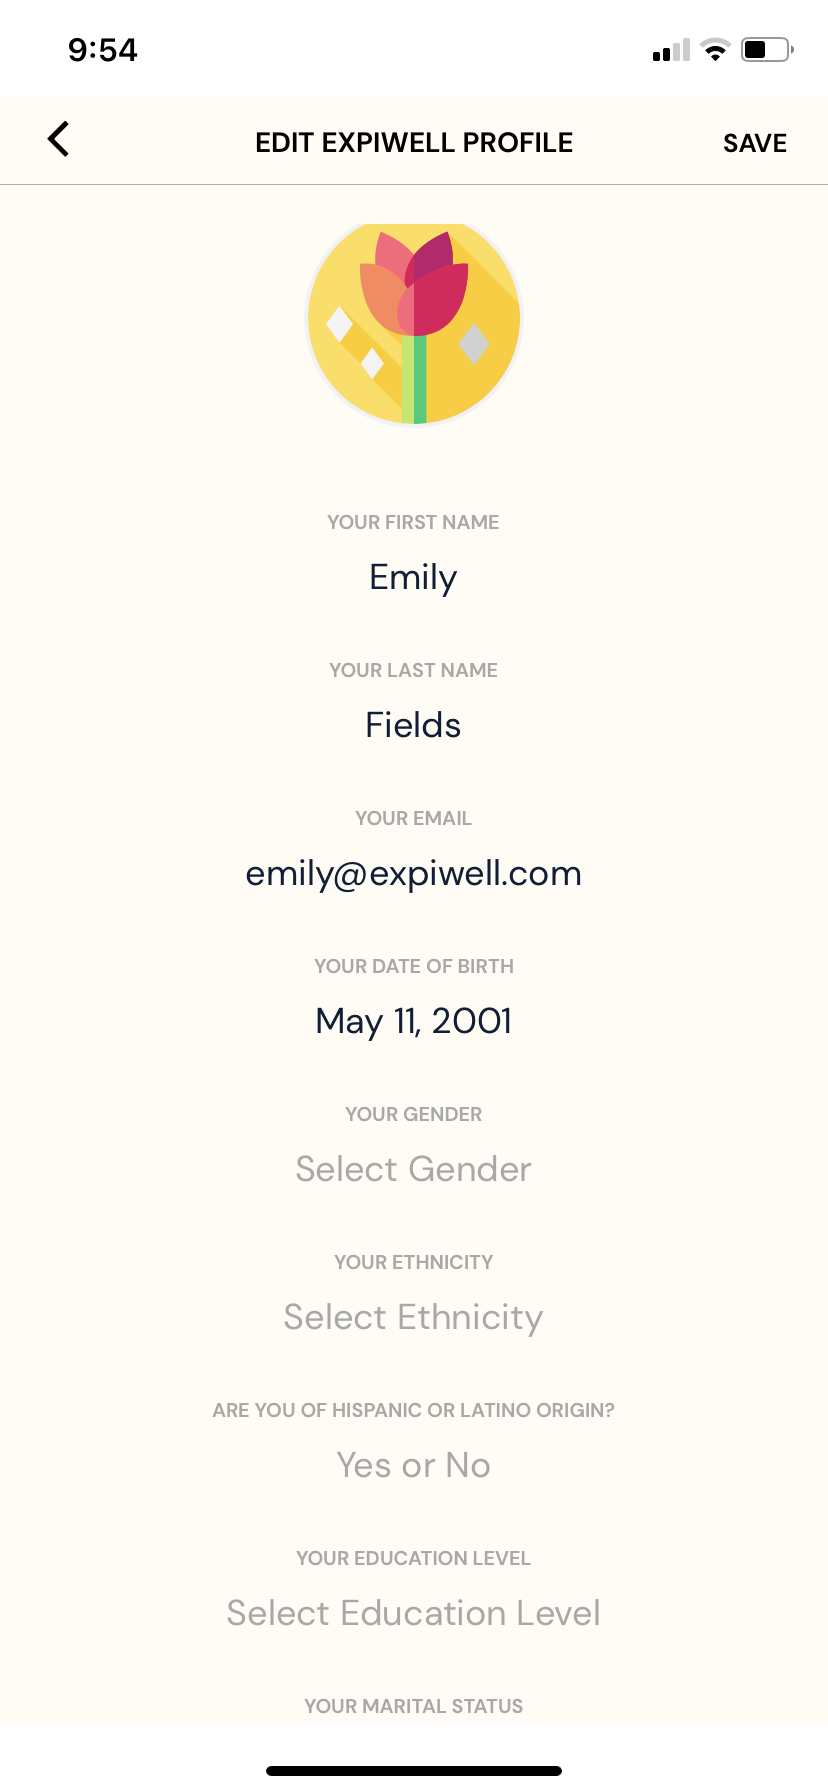 An edit your ExpiWell profile section